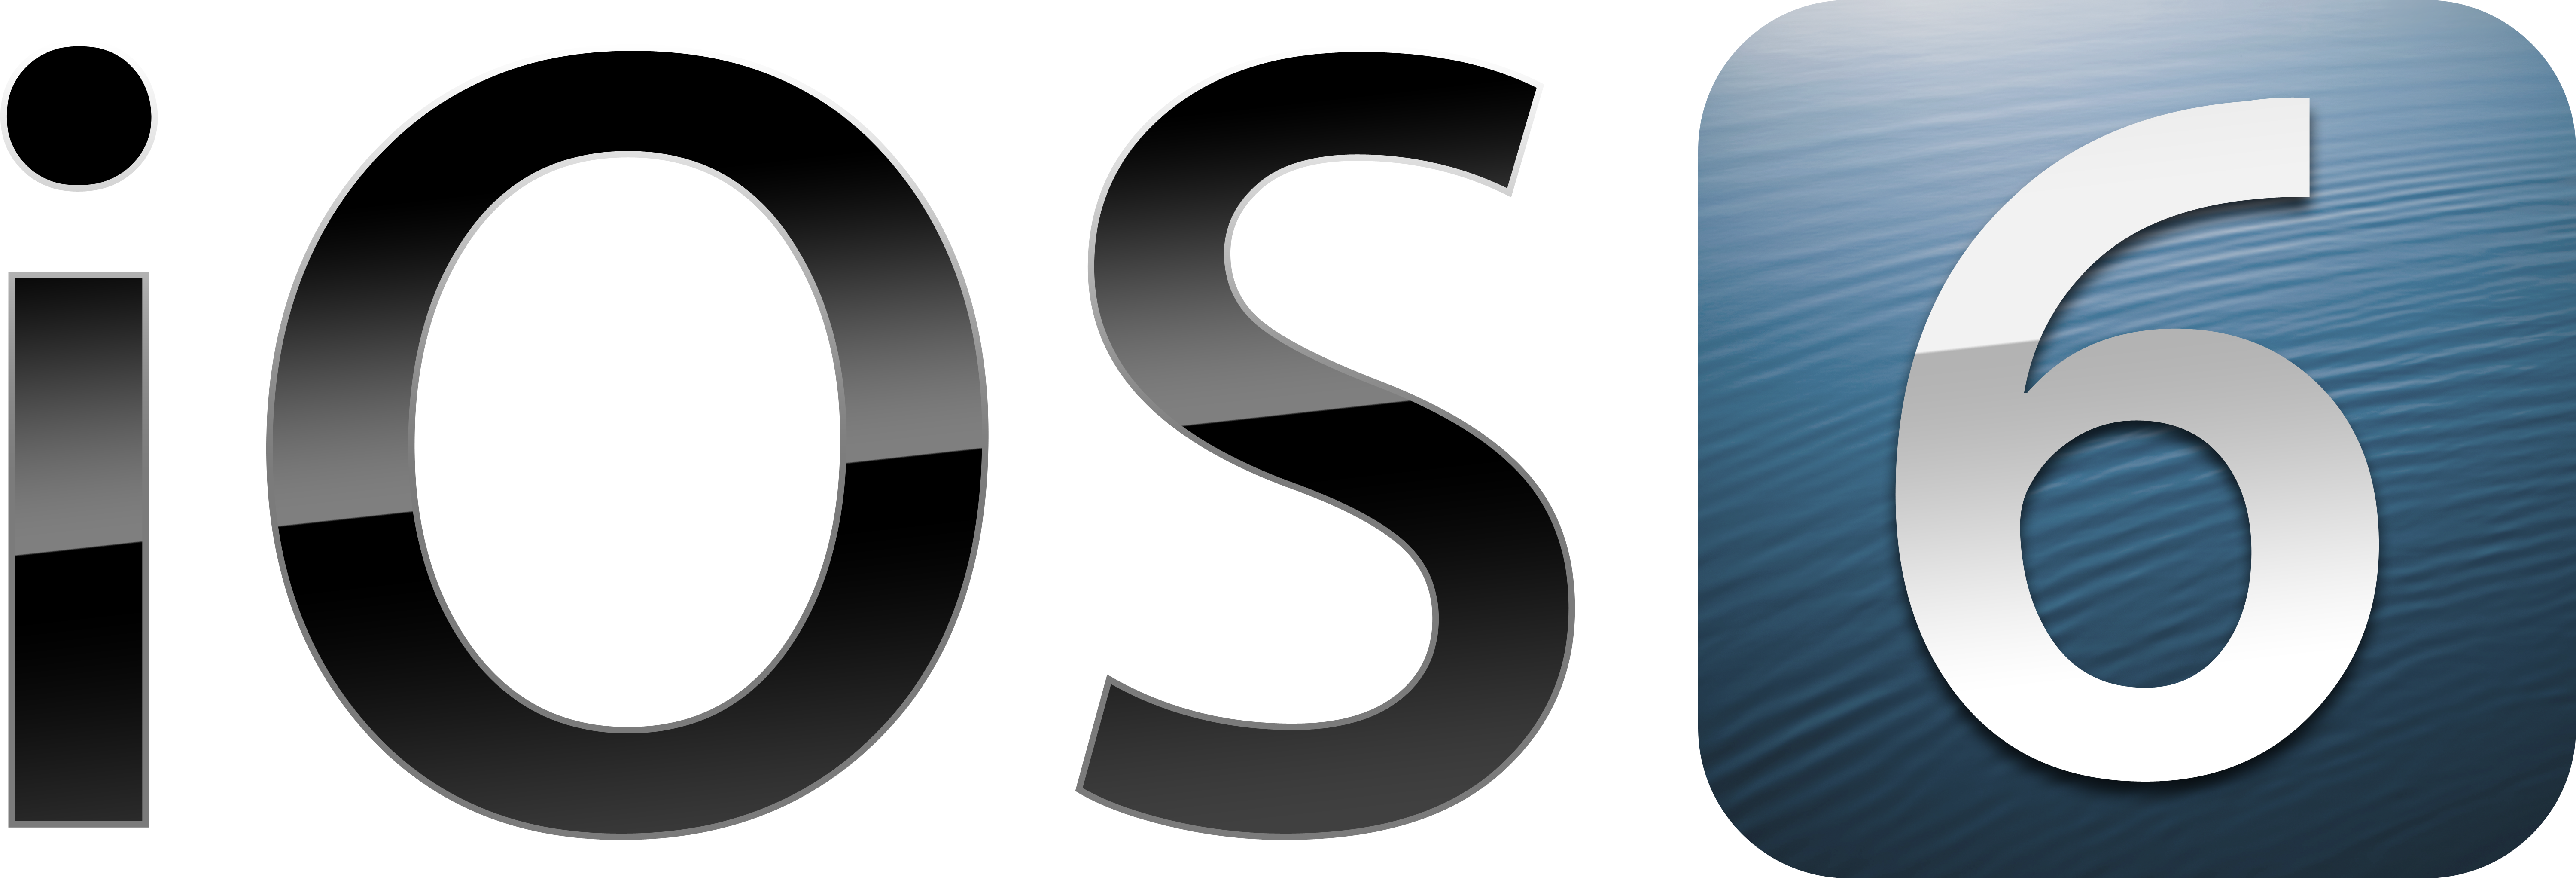 Ios Logo Psd Png By Theintenseplayer